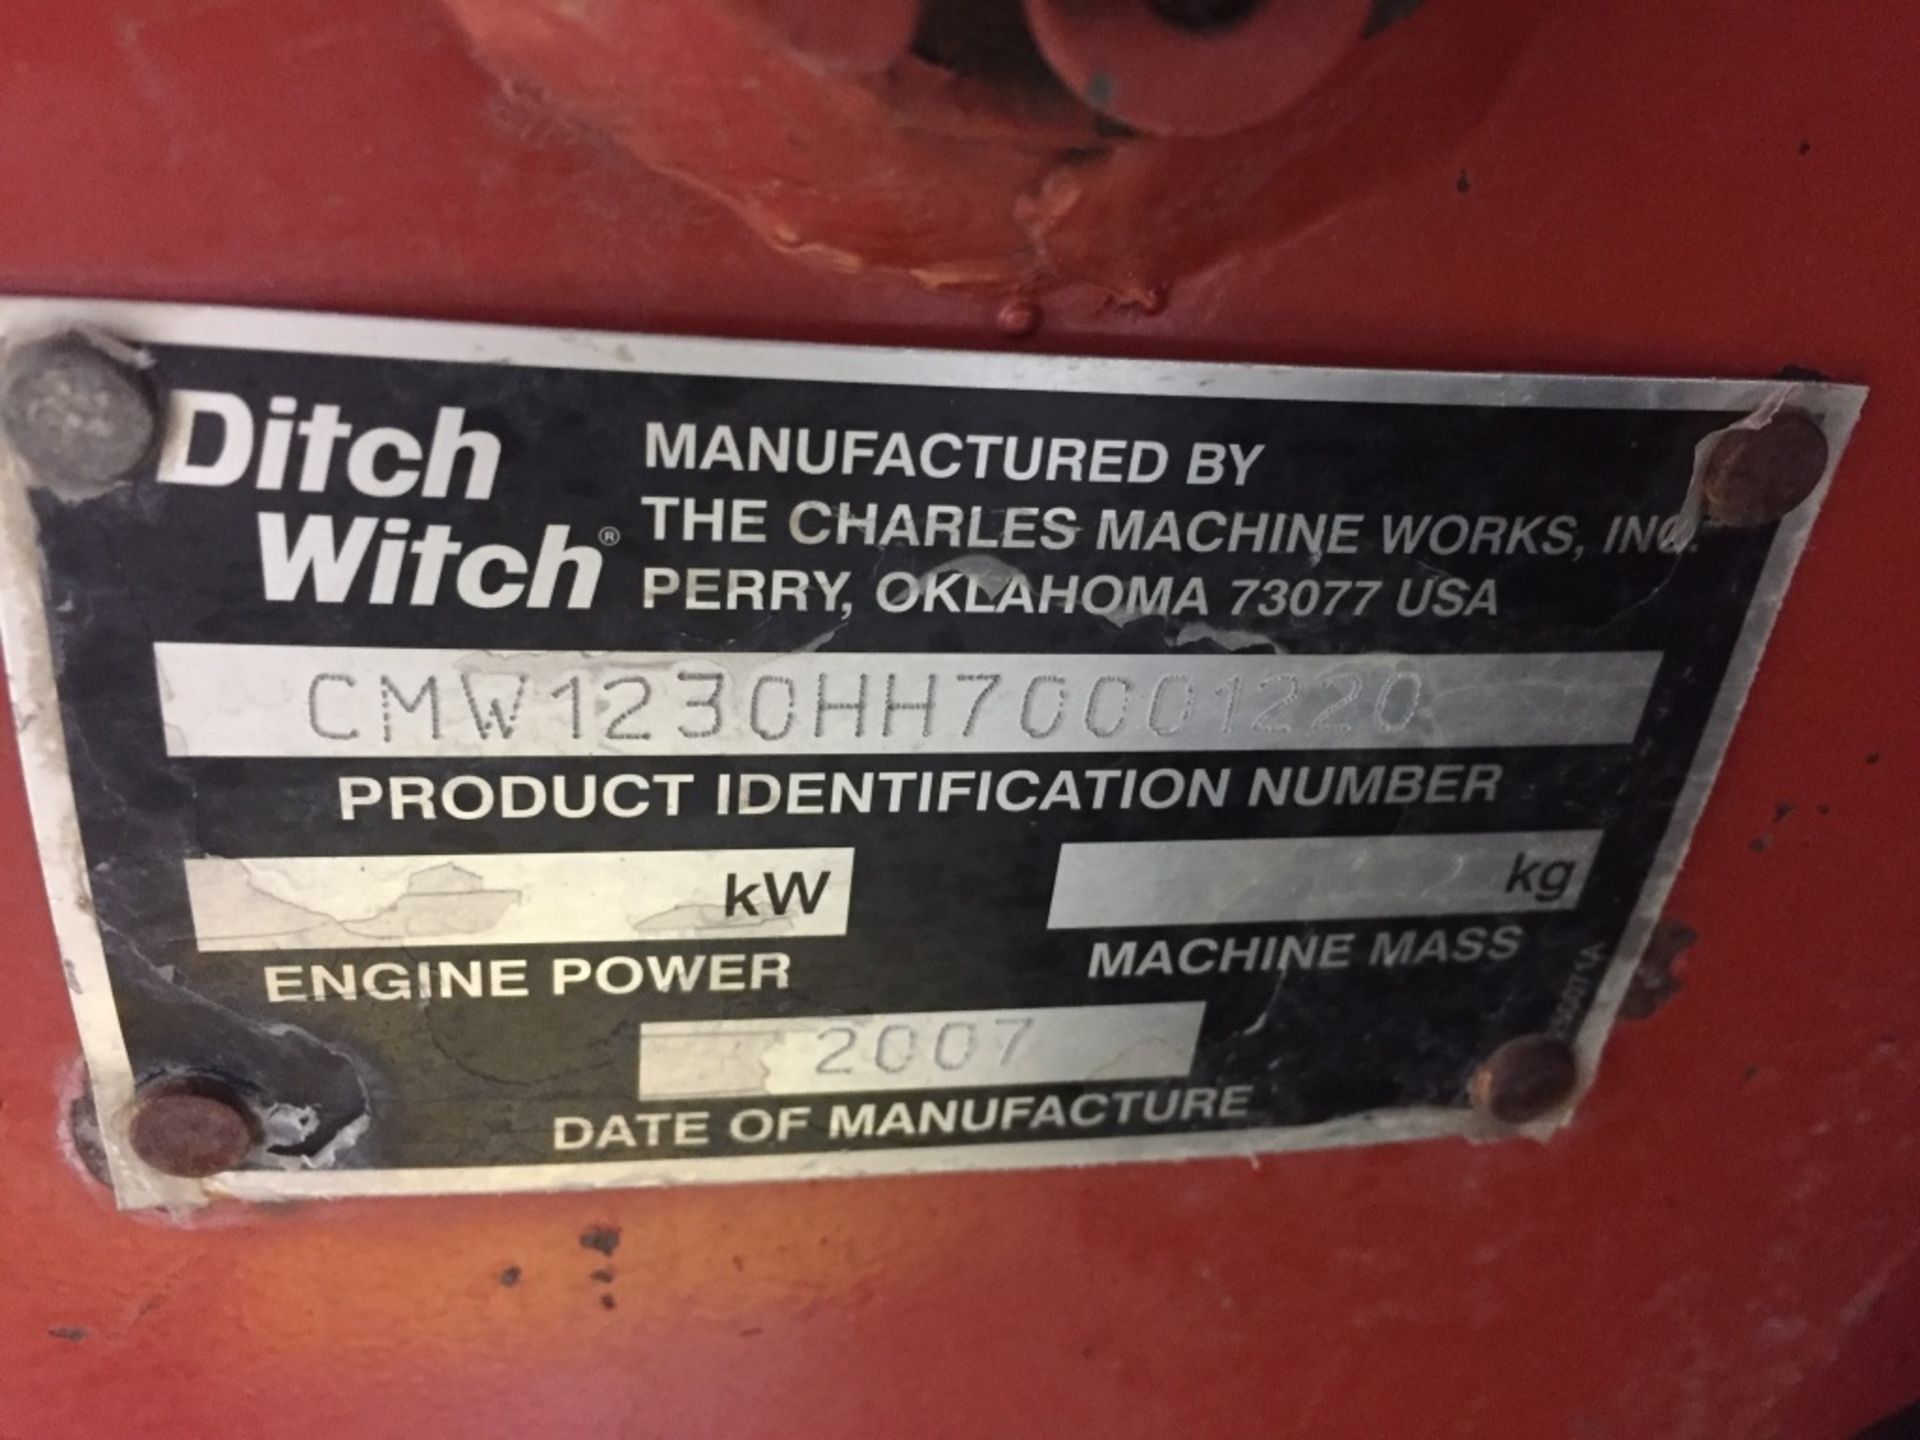 2007 Walk-behind Ditch Witch 1230 Trencher, Honda GX340, 11 HP - Image 5 of 5